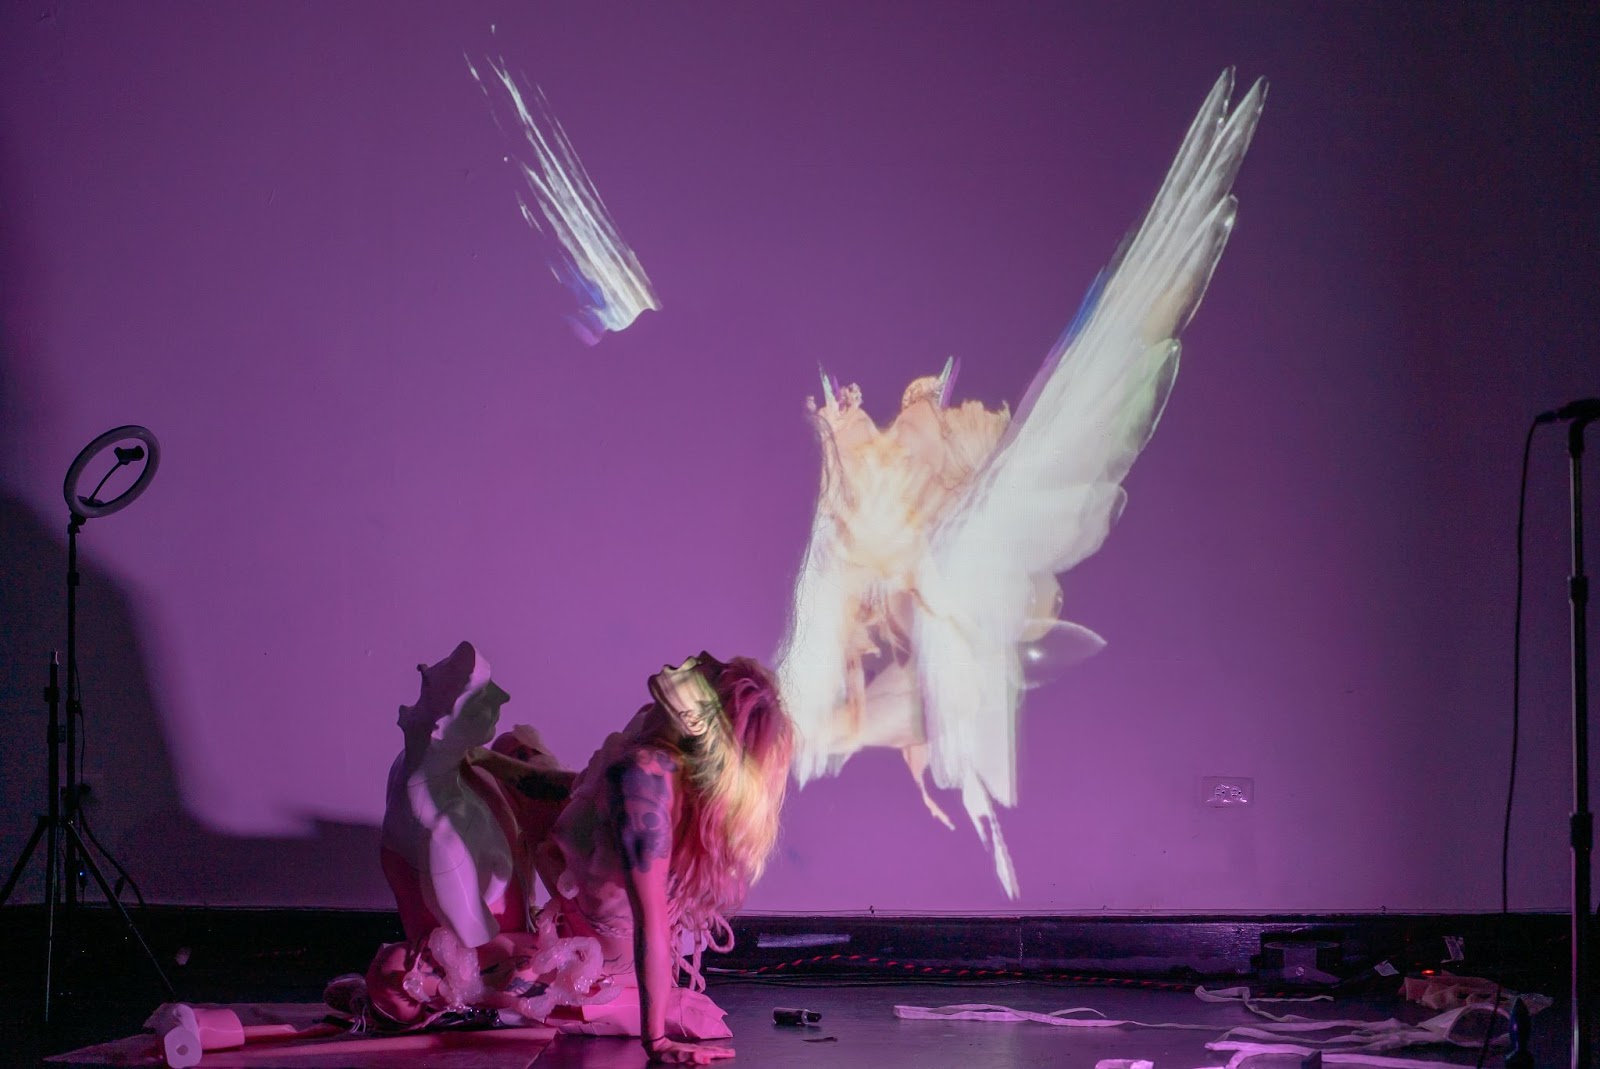 Image: Ava Wanbli performs “Sertraline Dolls'' at Elastic Arts for the Elastro A/V Festival. An image of a winged Ava kissing a double of herself is projected on the wall behind Ava, who is fucking the pink-and-white mannequin. Her head is thrown back and her mouth is open in ecstasy. Ribbons from her costume, a bottle of lube, and one of the mannequin’s limbs litter the floor. Photo by Mikey Mosher.